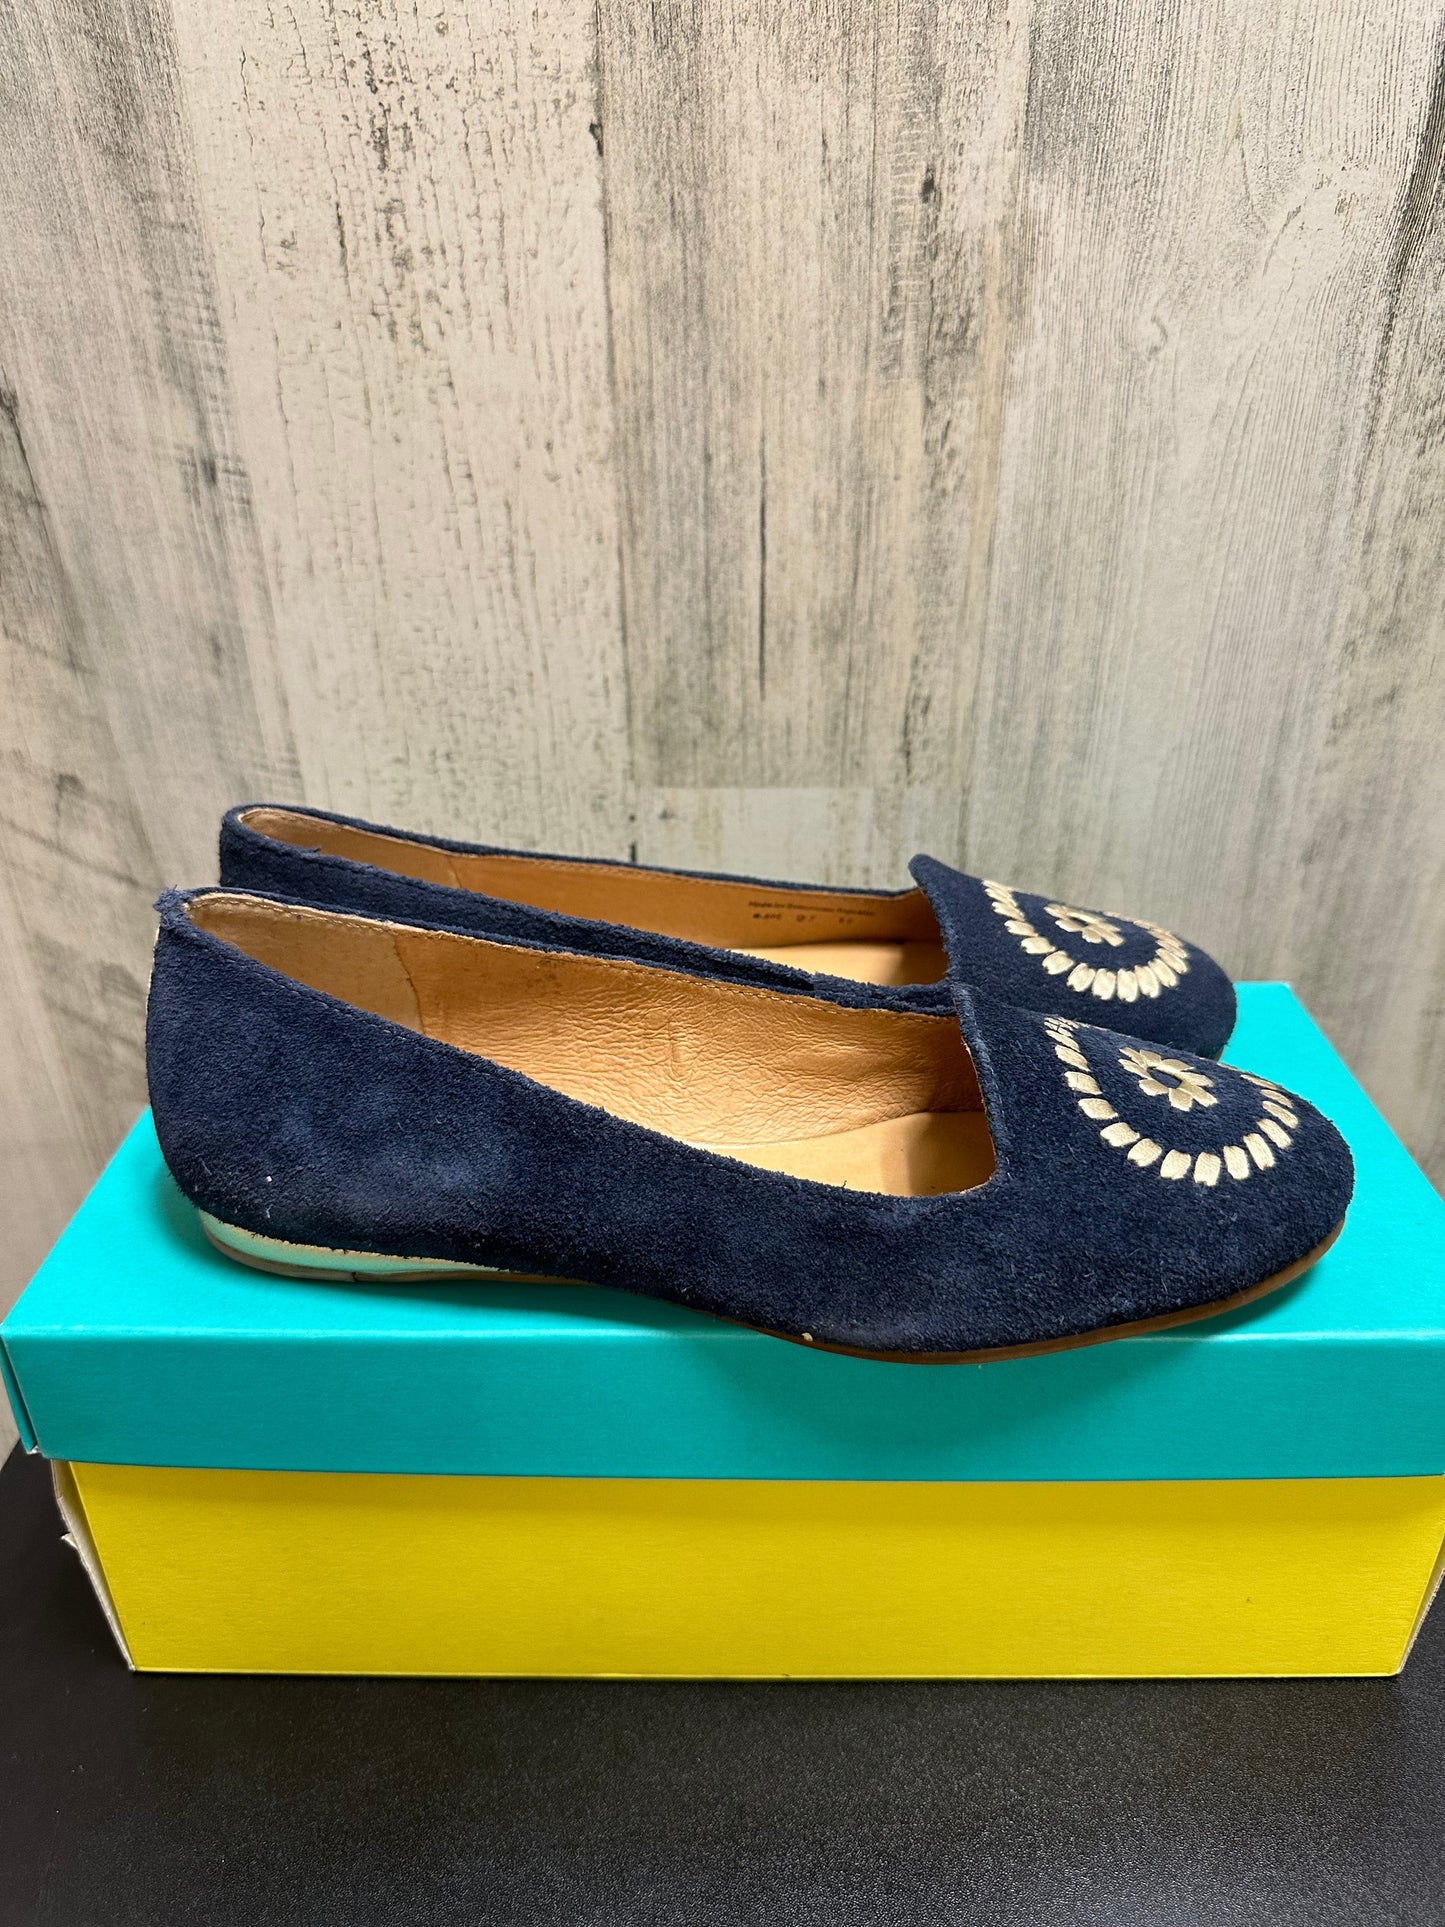 Navy Shoes Flats Jack Rogers, Size 6.5